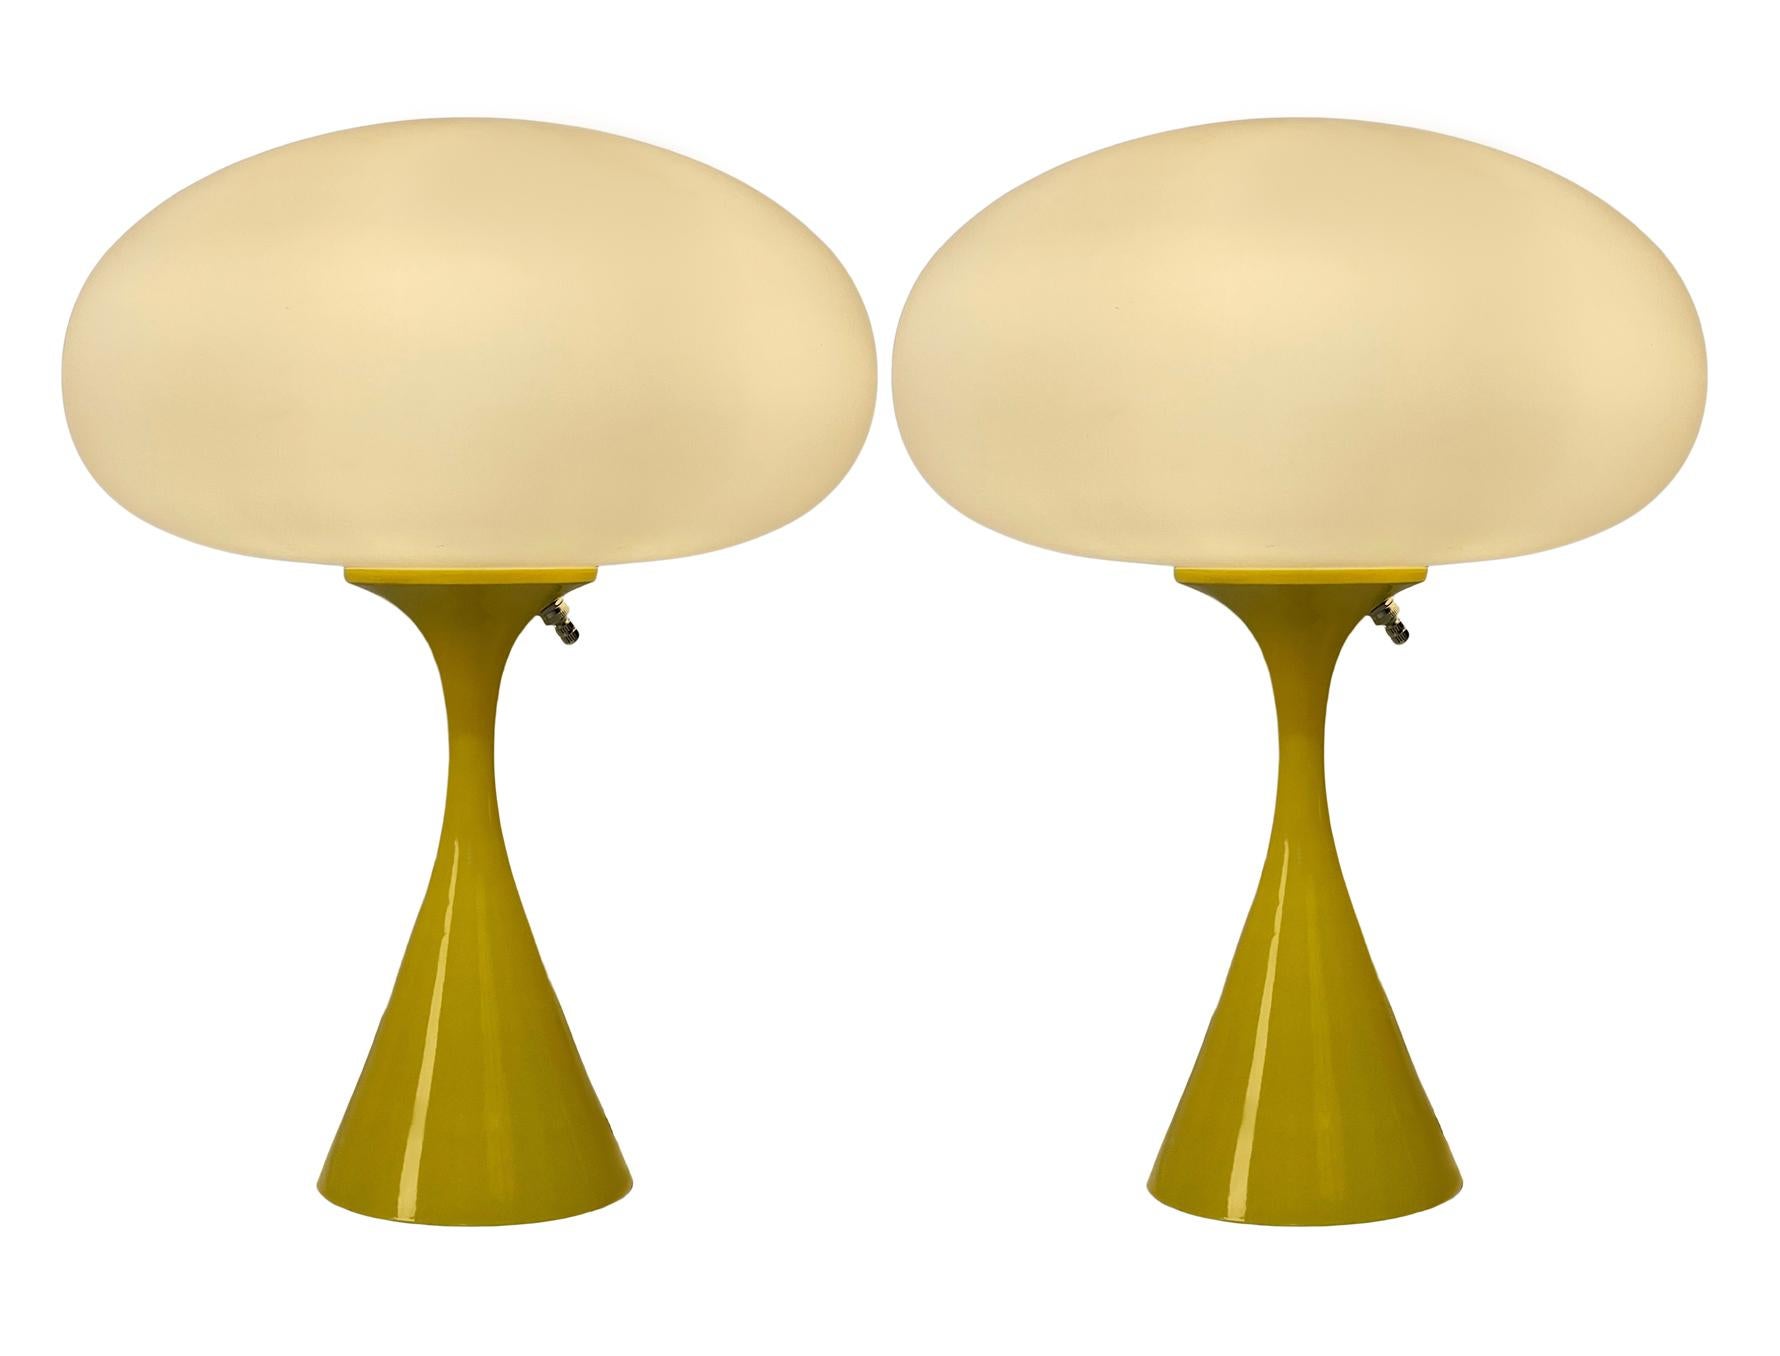 A handsome matching pair of table lamps in a conical mushroom form after Laurel Lamp Company. The lamp features a cast aluminum base with a yellow powder coat and a mouth blown frosted glass lamp shade. Price includes the pair as shown.